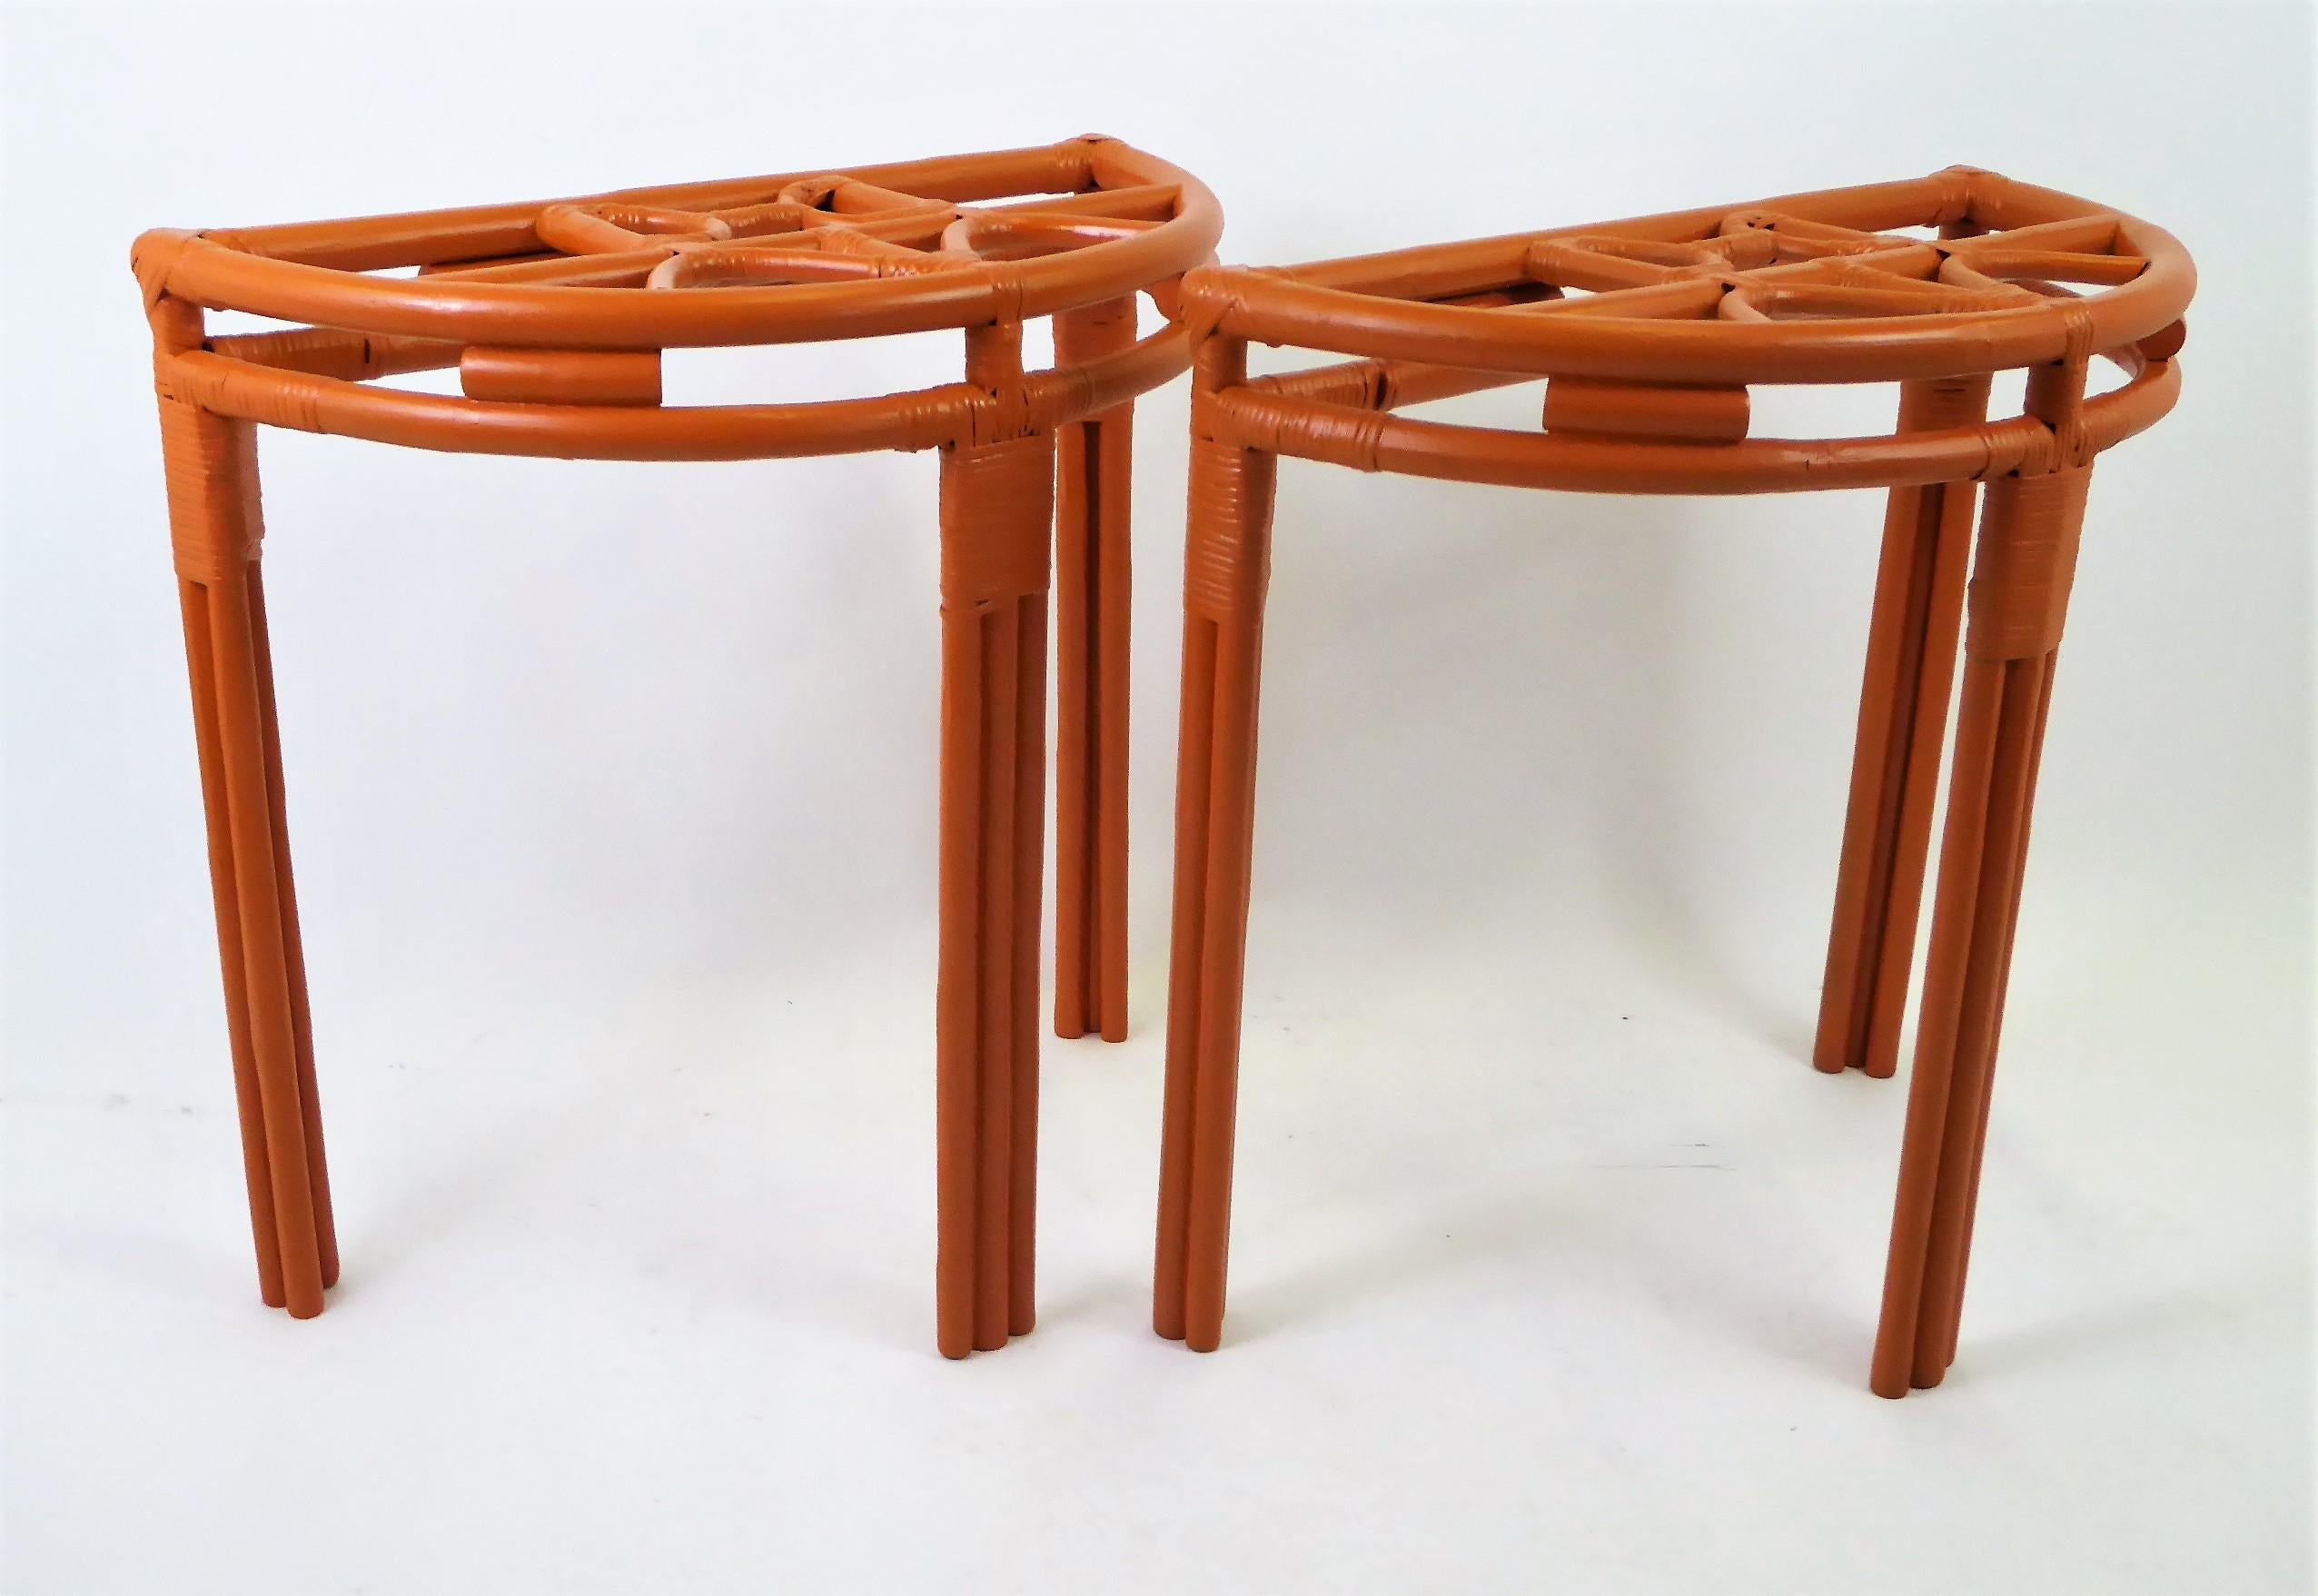 Mid-20th Century 1940s Painted Rattan Demilune Glass Top Consoles in Hermes Orange